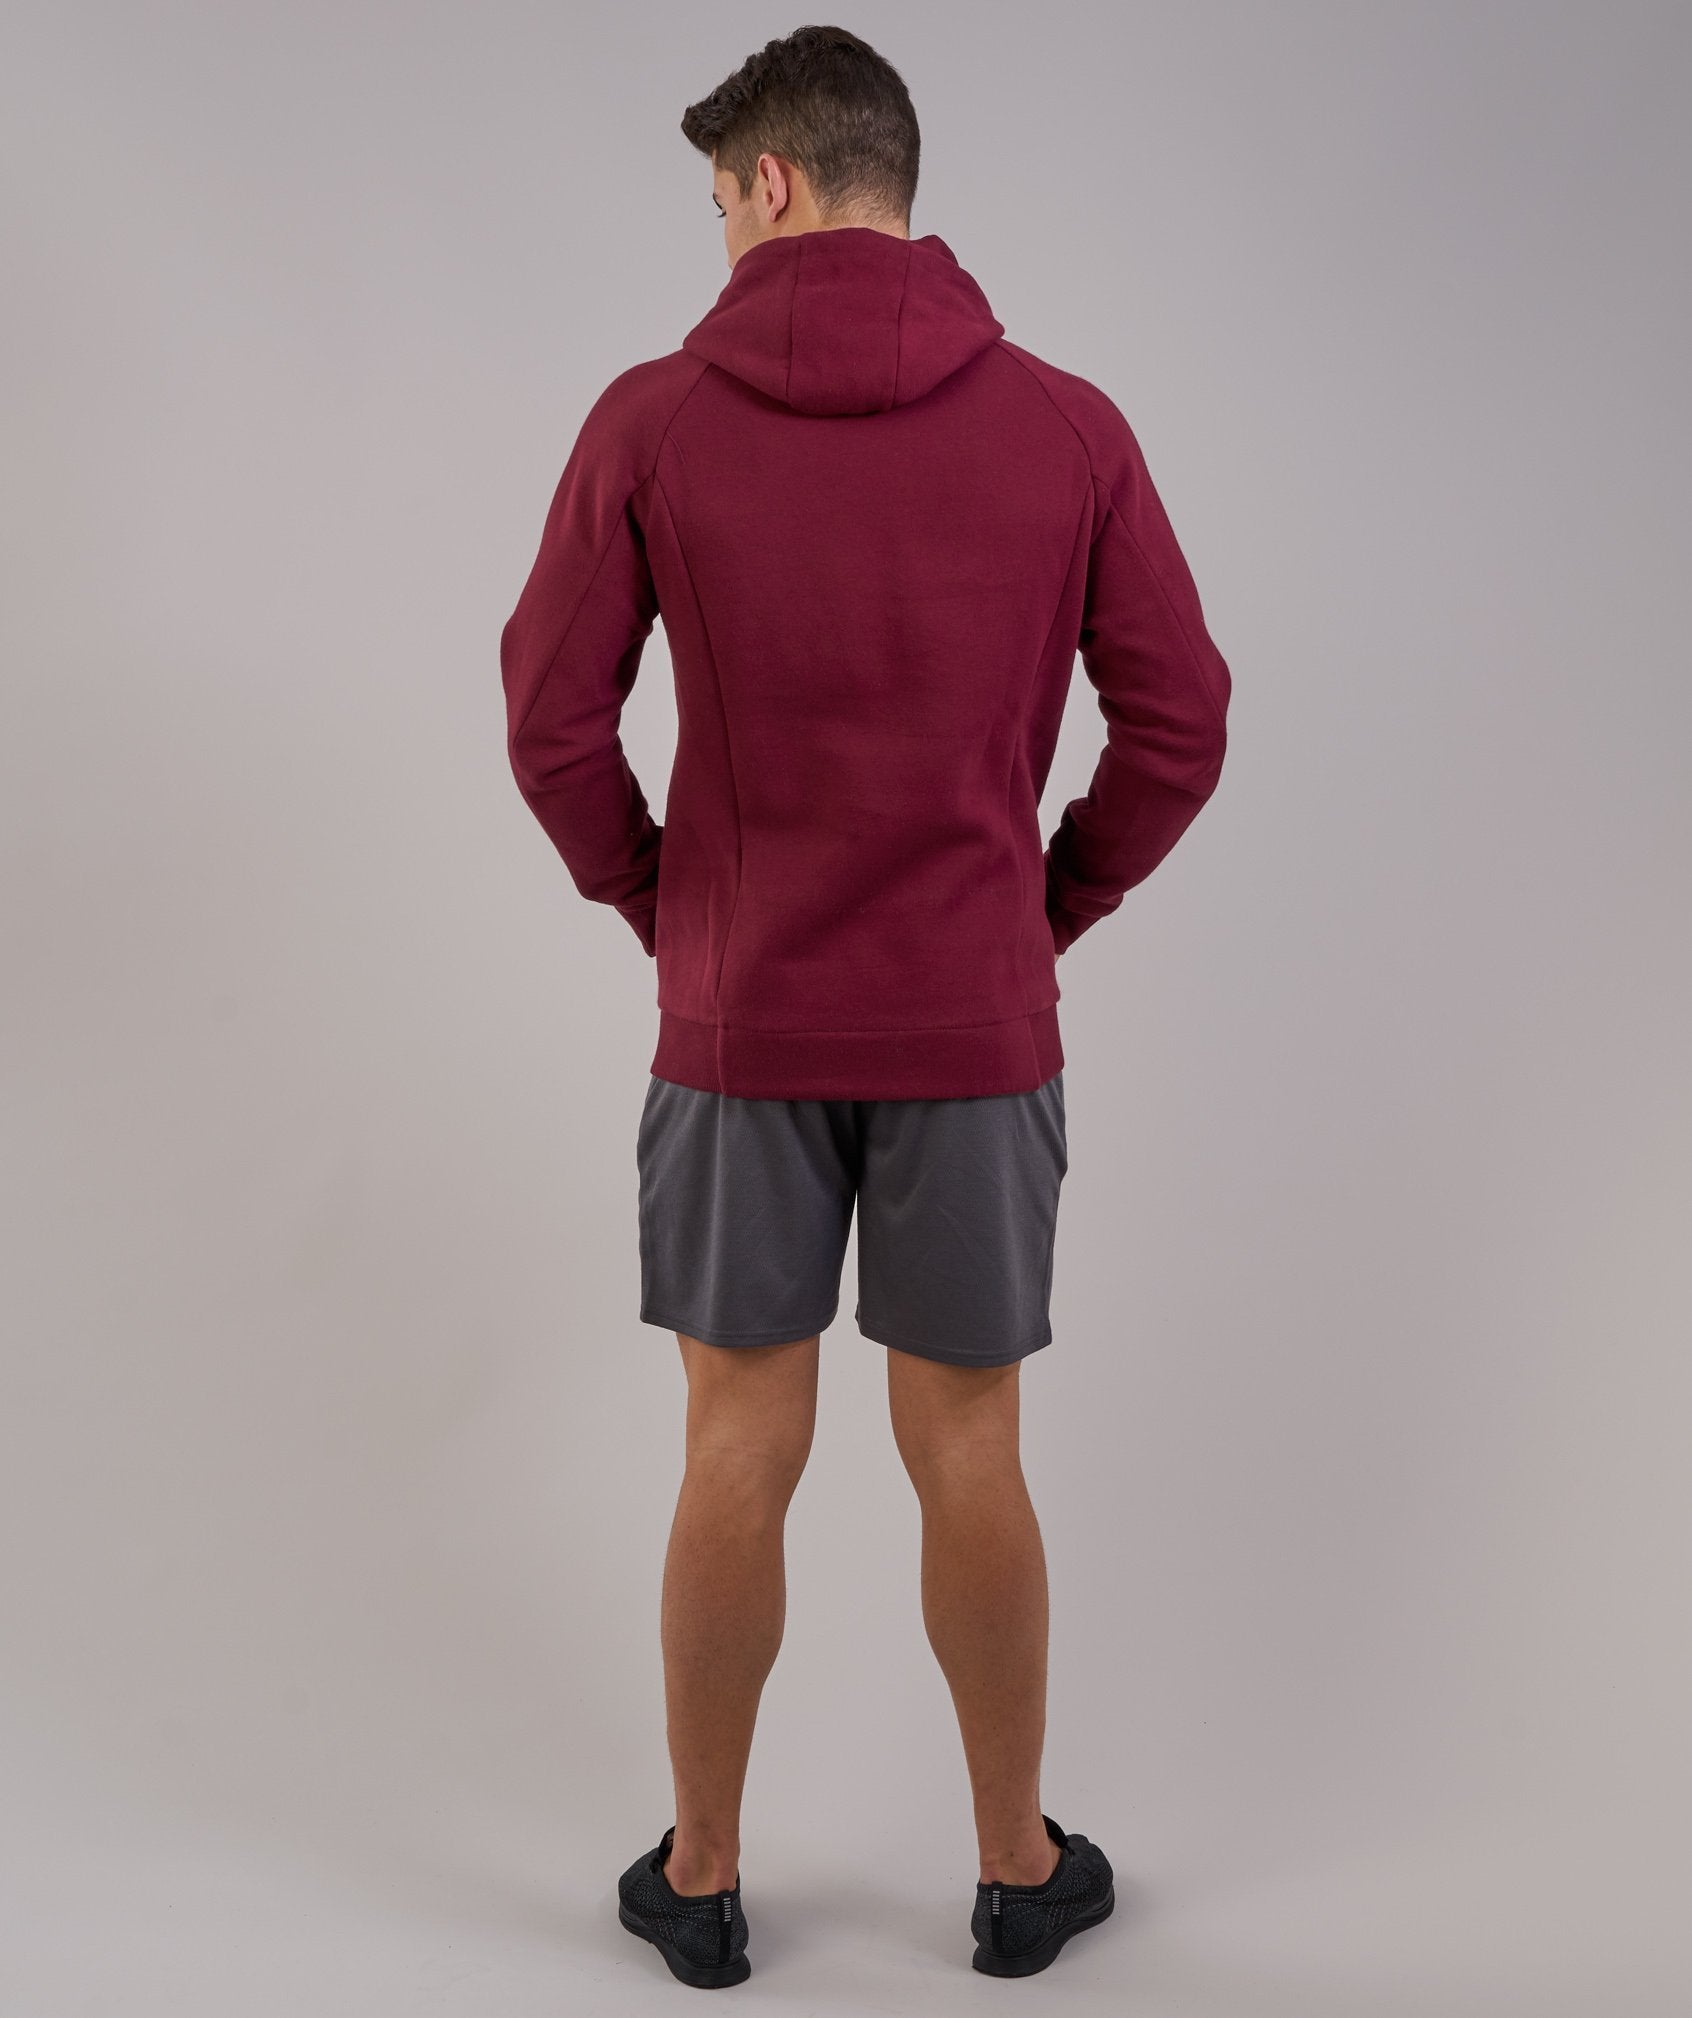 Oversized Hoodie in Port - view 2